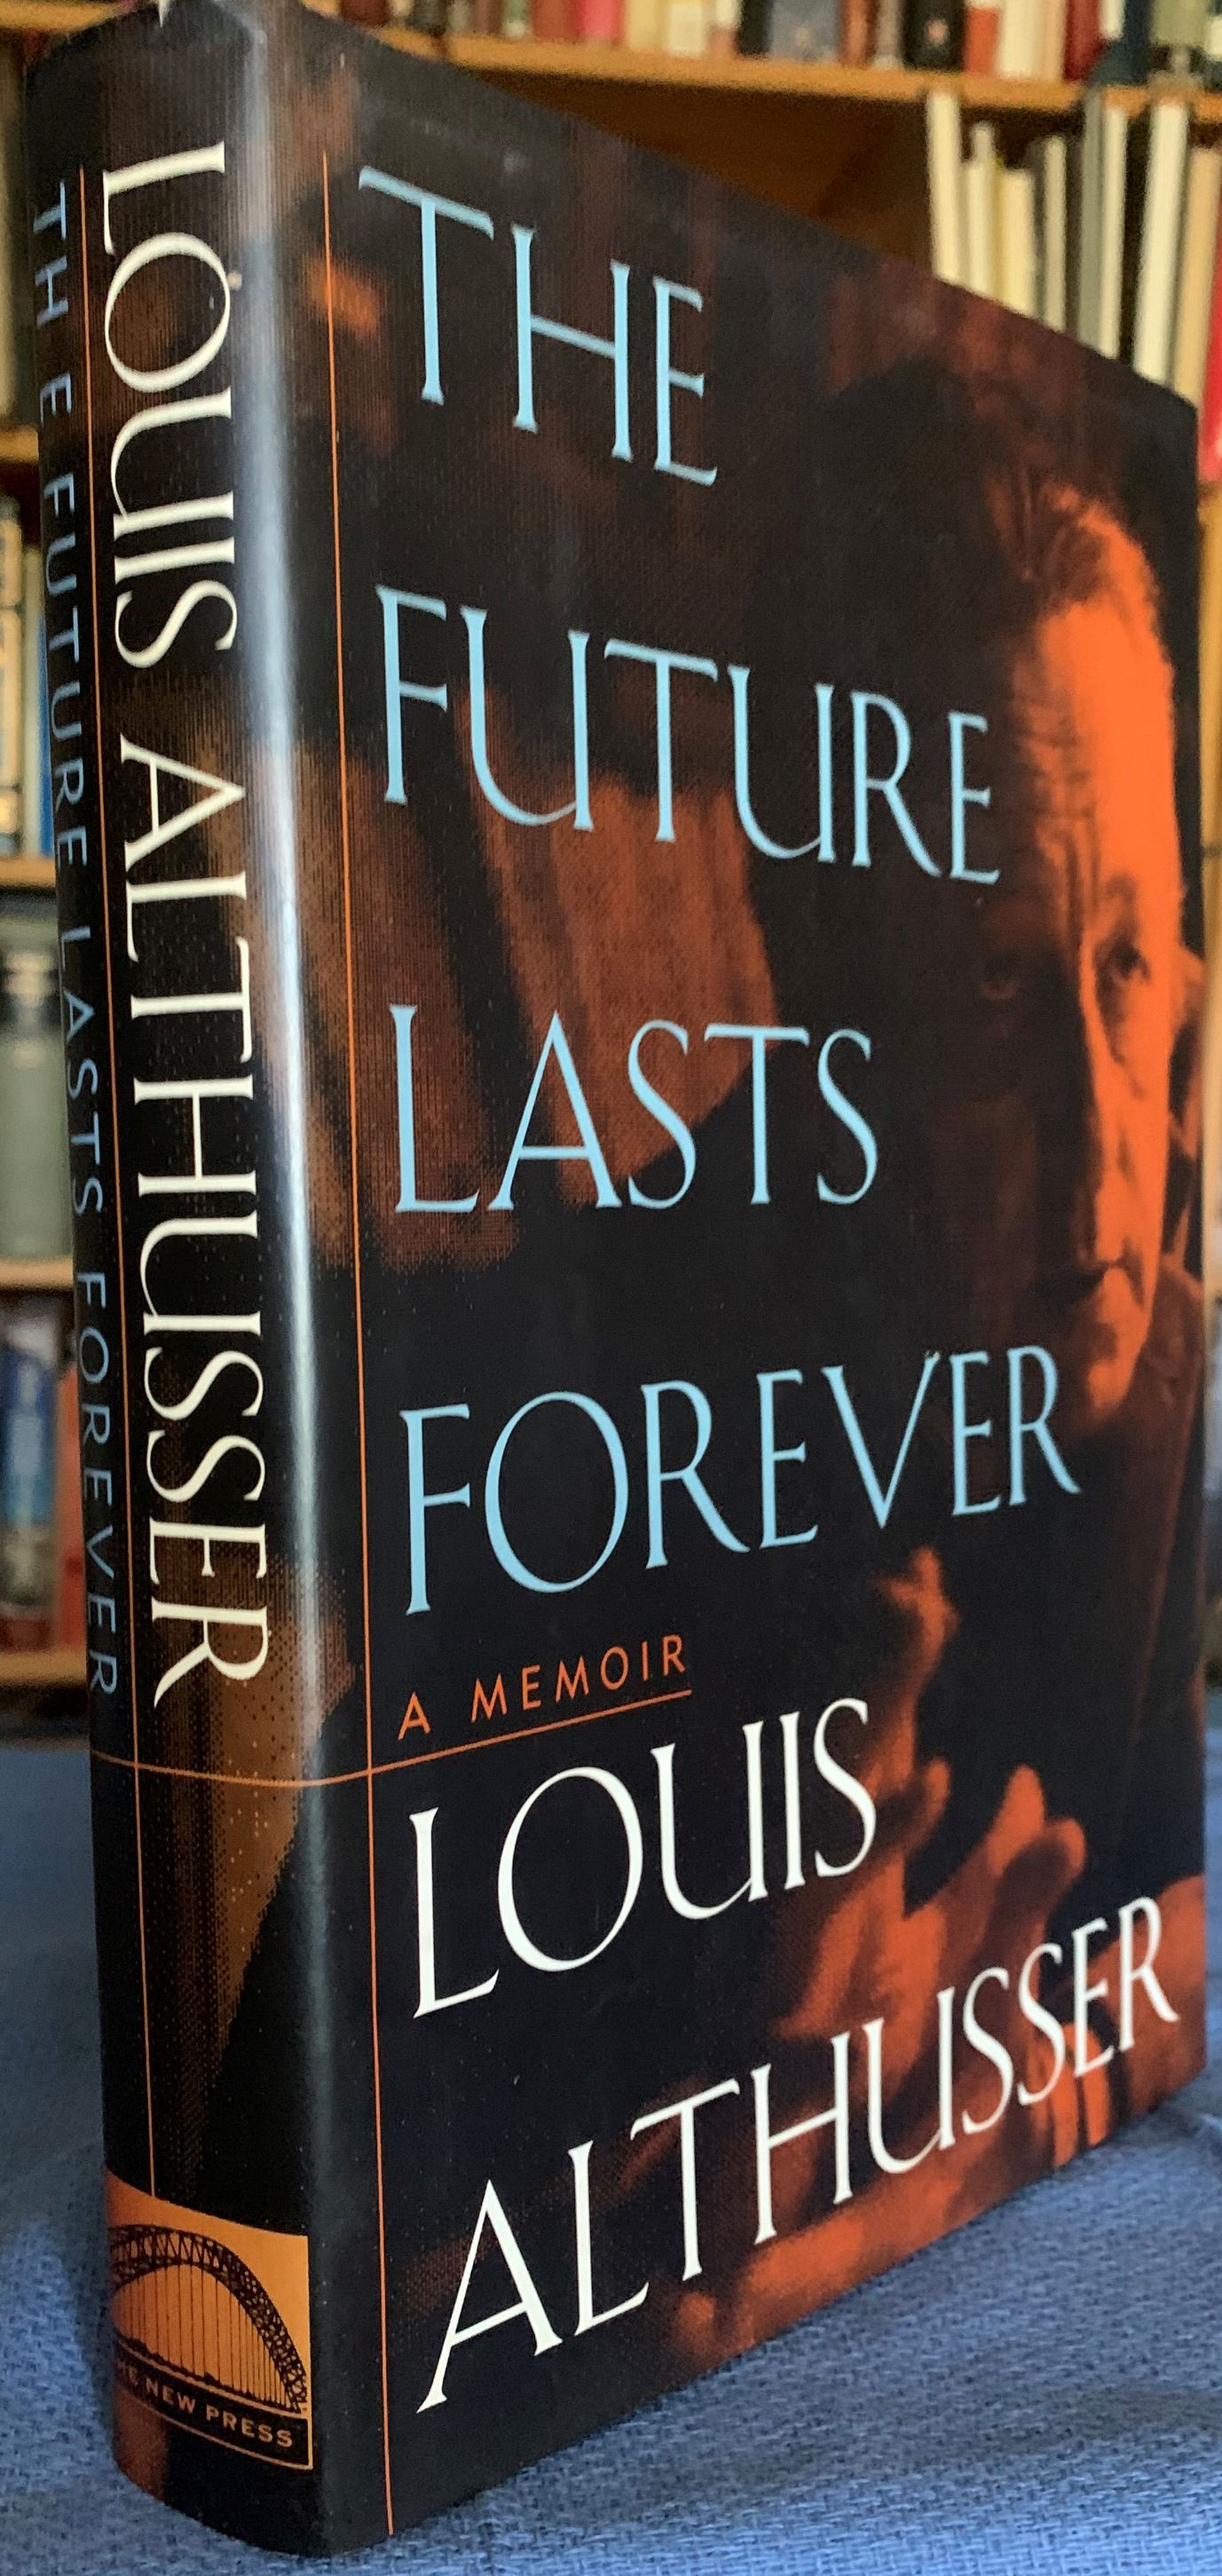 Image for The Future Lasts Forever, A Memoir. Edited by Olivier Corpet and Yann Moulier Boutang. Translated by Richard Veasey.